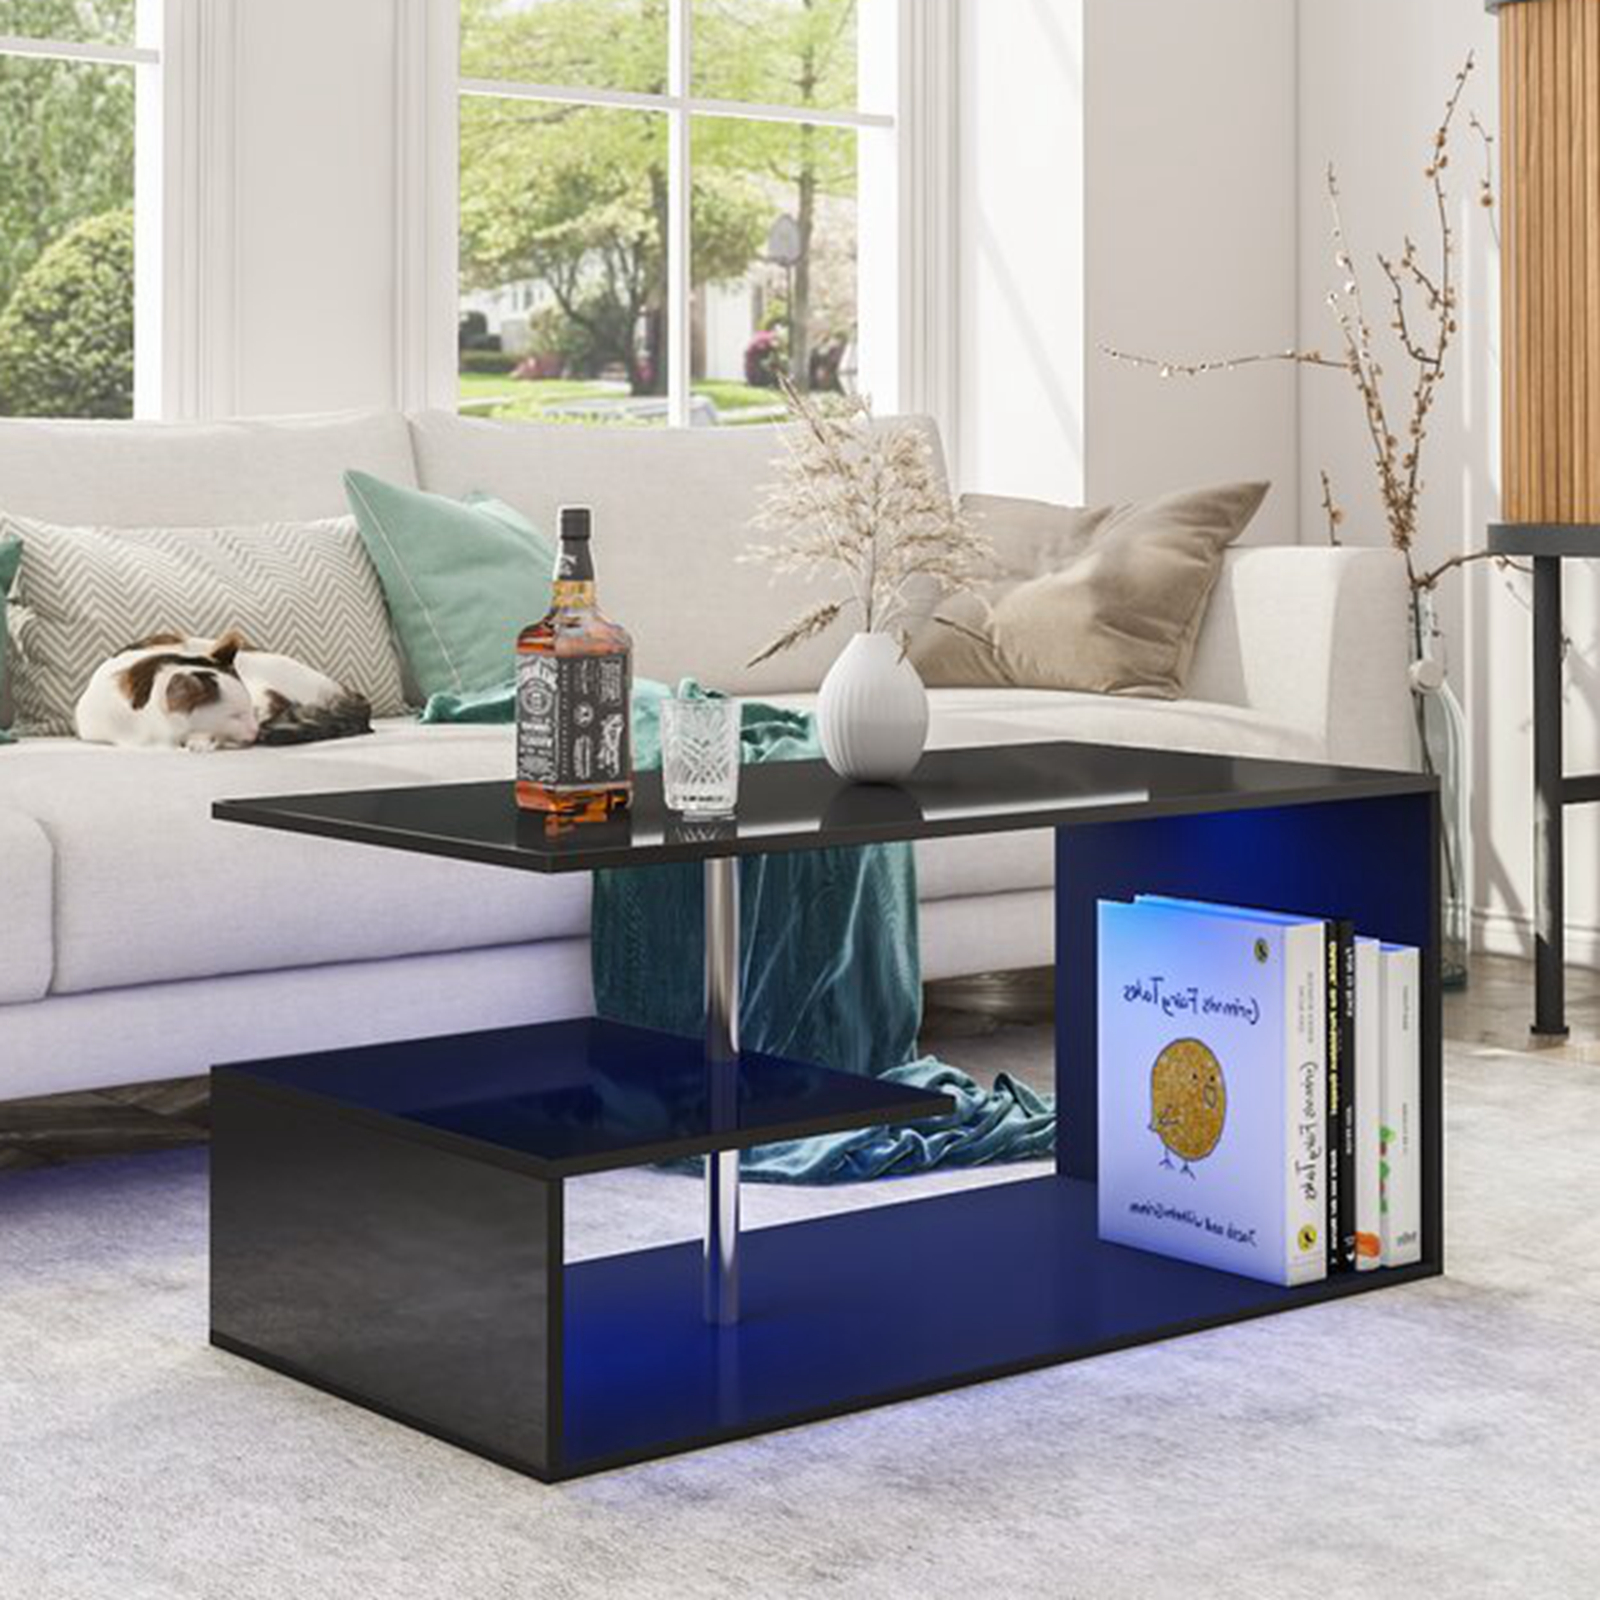 Hommpa High Gloss Coffee Table with Open Shelf LED Lights Smart APP Control Black Center Sofa End Table S Shaped Modern Cocktail Tables with for Living Room - image 1 of 12